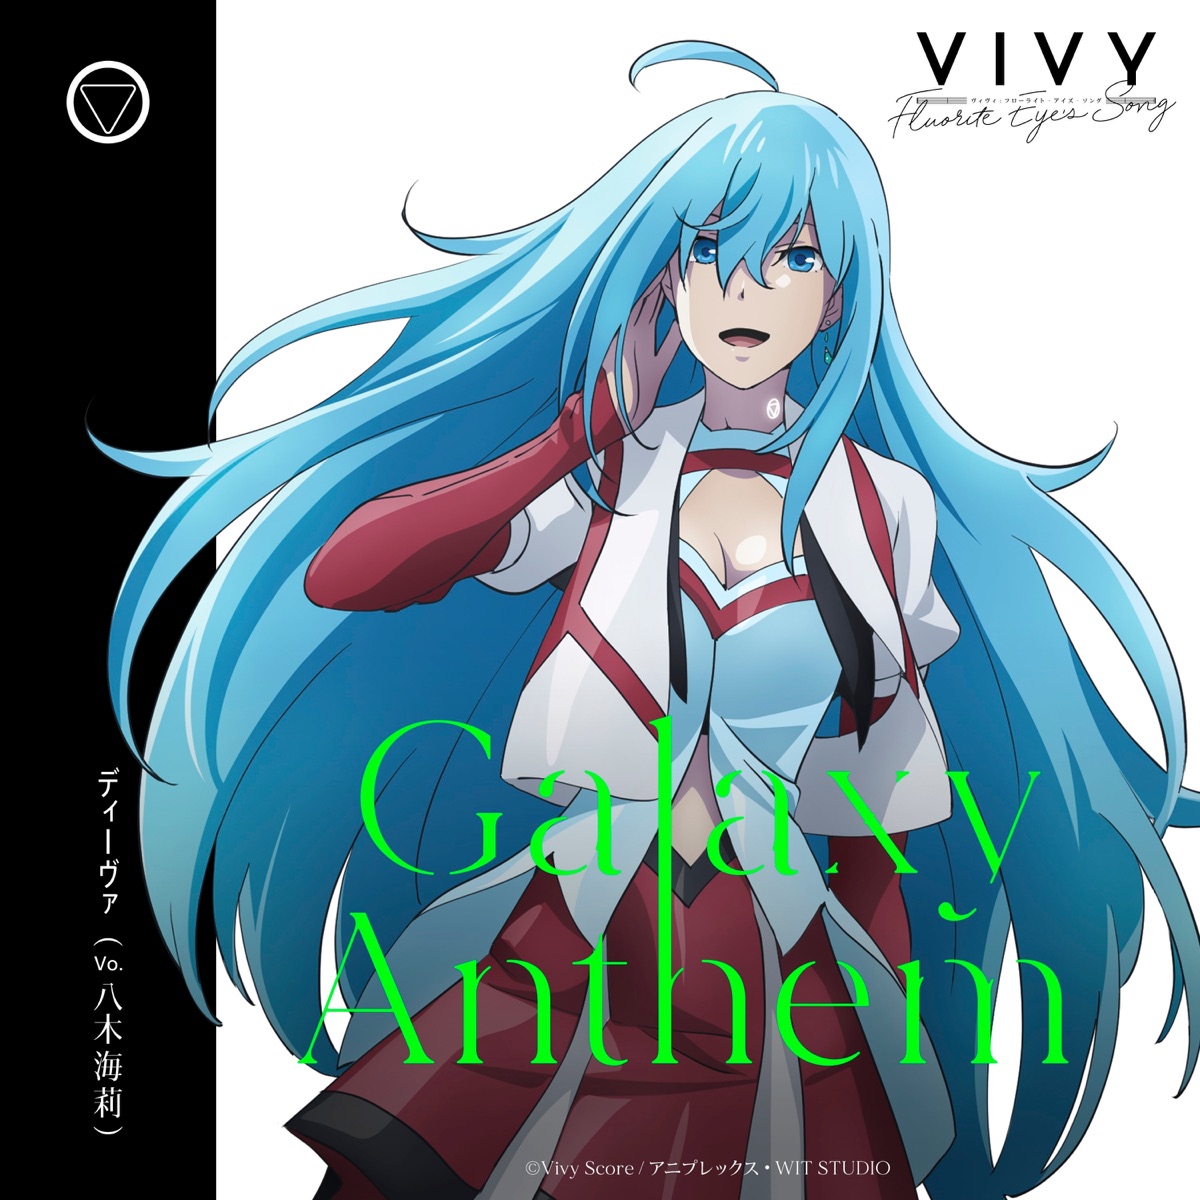 Cover for『Diva (Kairi Yagi) - Galaxy Anthem』from the release『Galaxy Anthem』